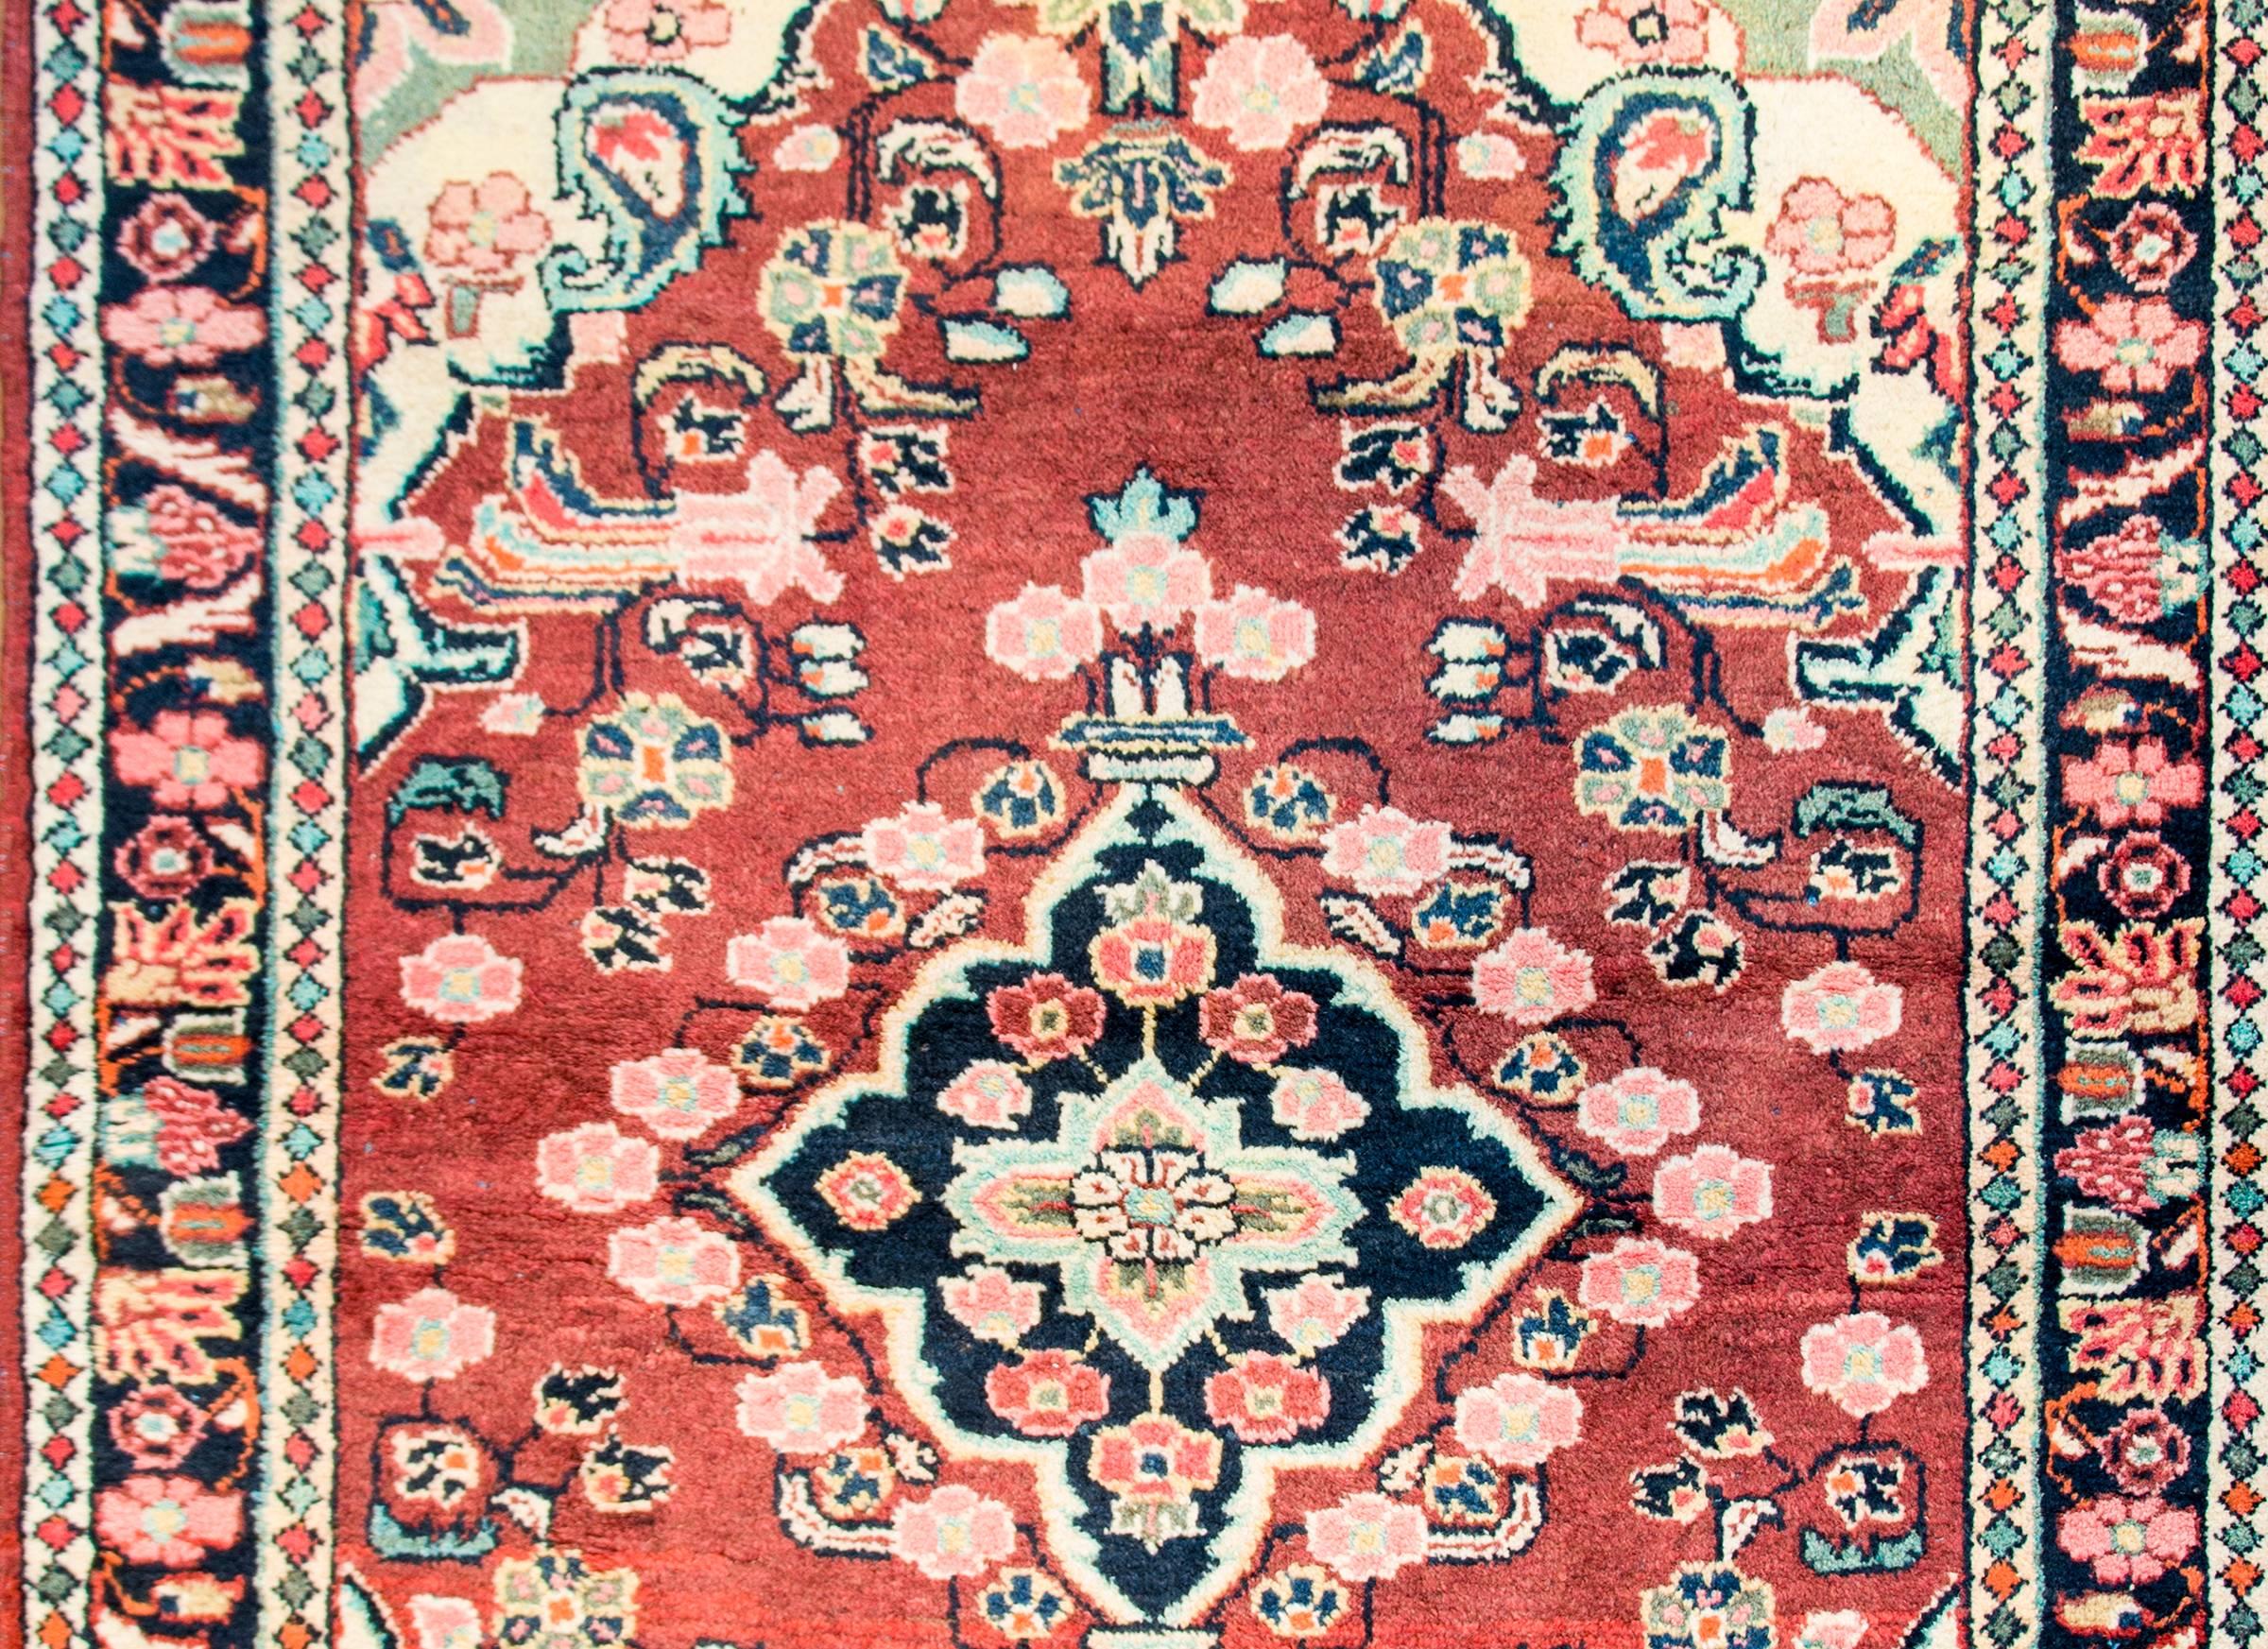 An amazing early 20th century Persian Mahal rug with wonderfully woven floral patterned diamond medallion on a dark cranberry colored background surrounded by an elaborate contrasting floral border. The border is wide with a central floral stripe